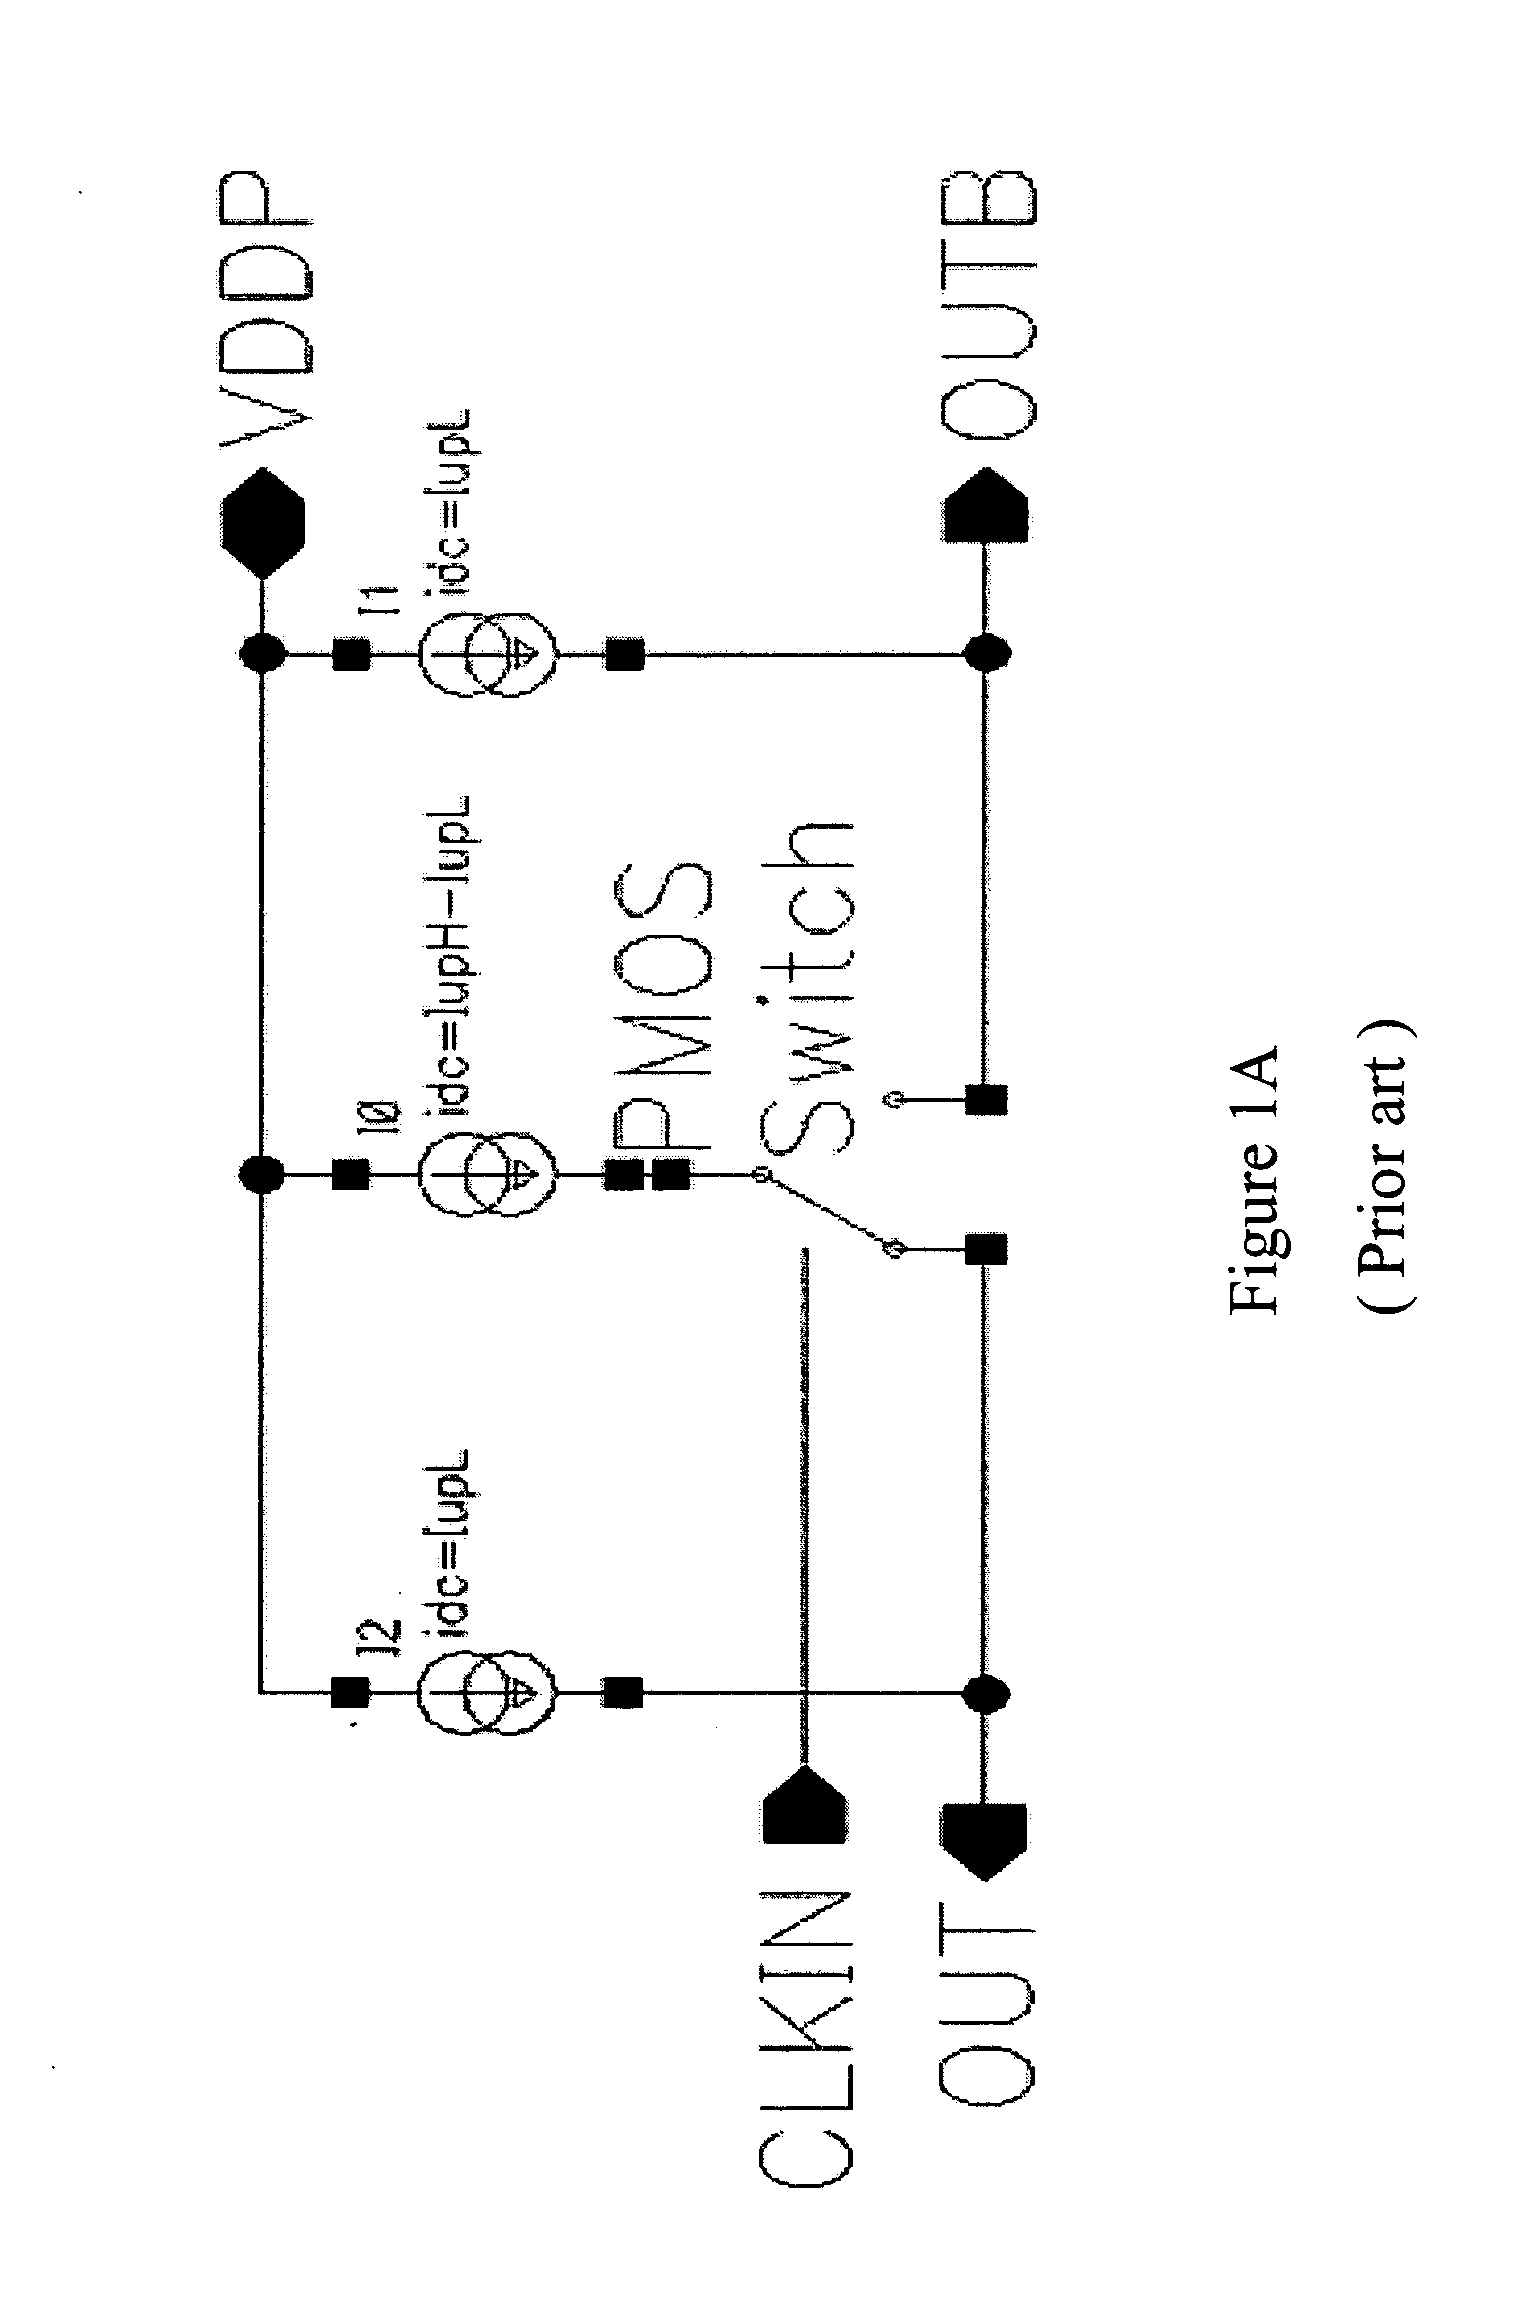 Complimentary metal oxide silicon low voltage positive emitter coupled logic buffer